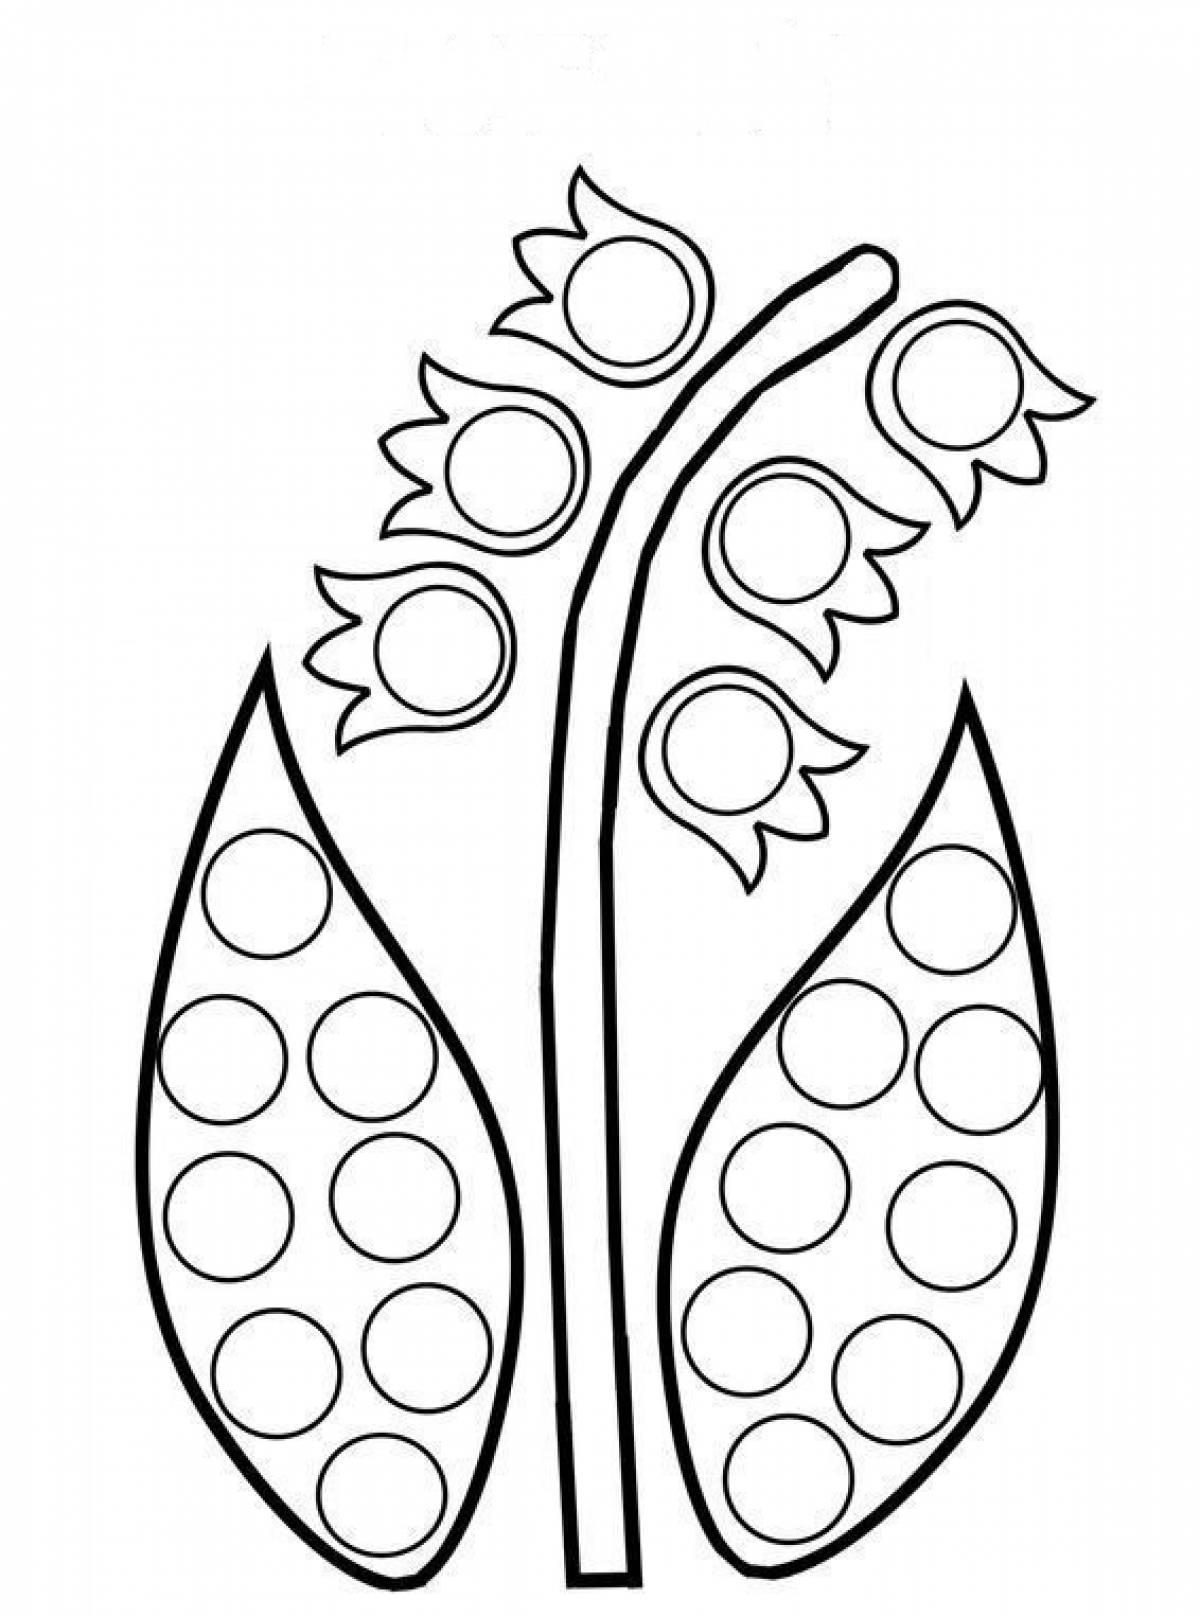 Coloring pages for fingers lily of the valley